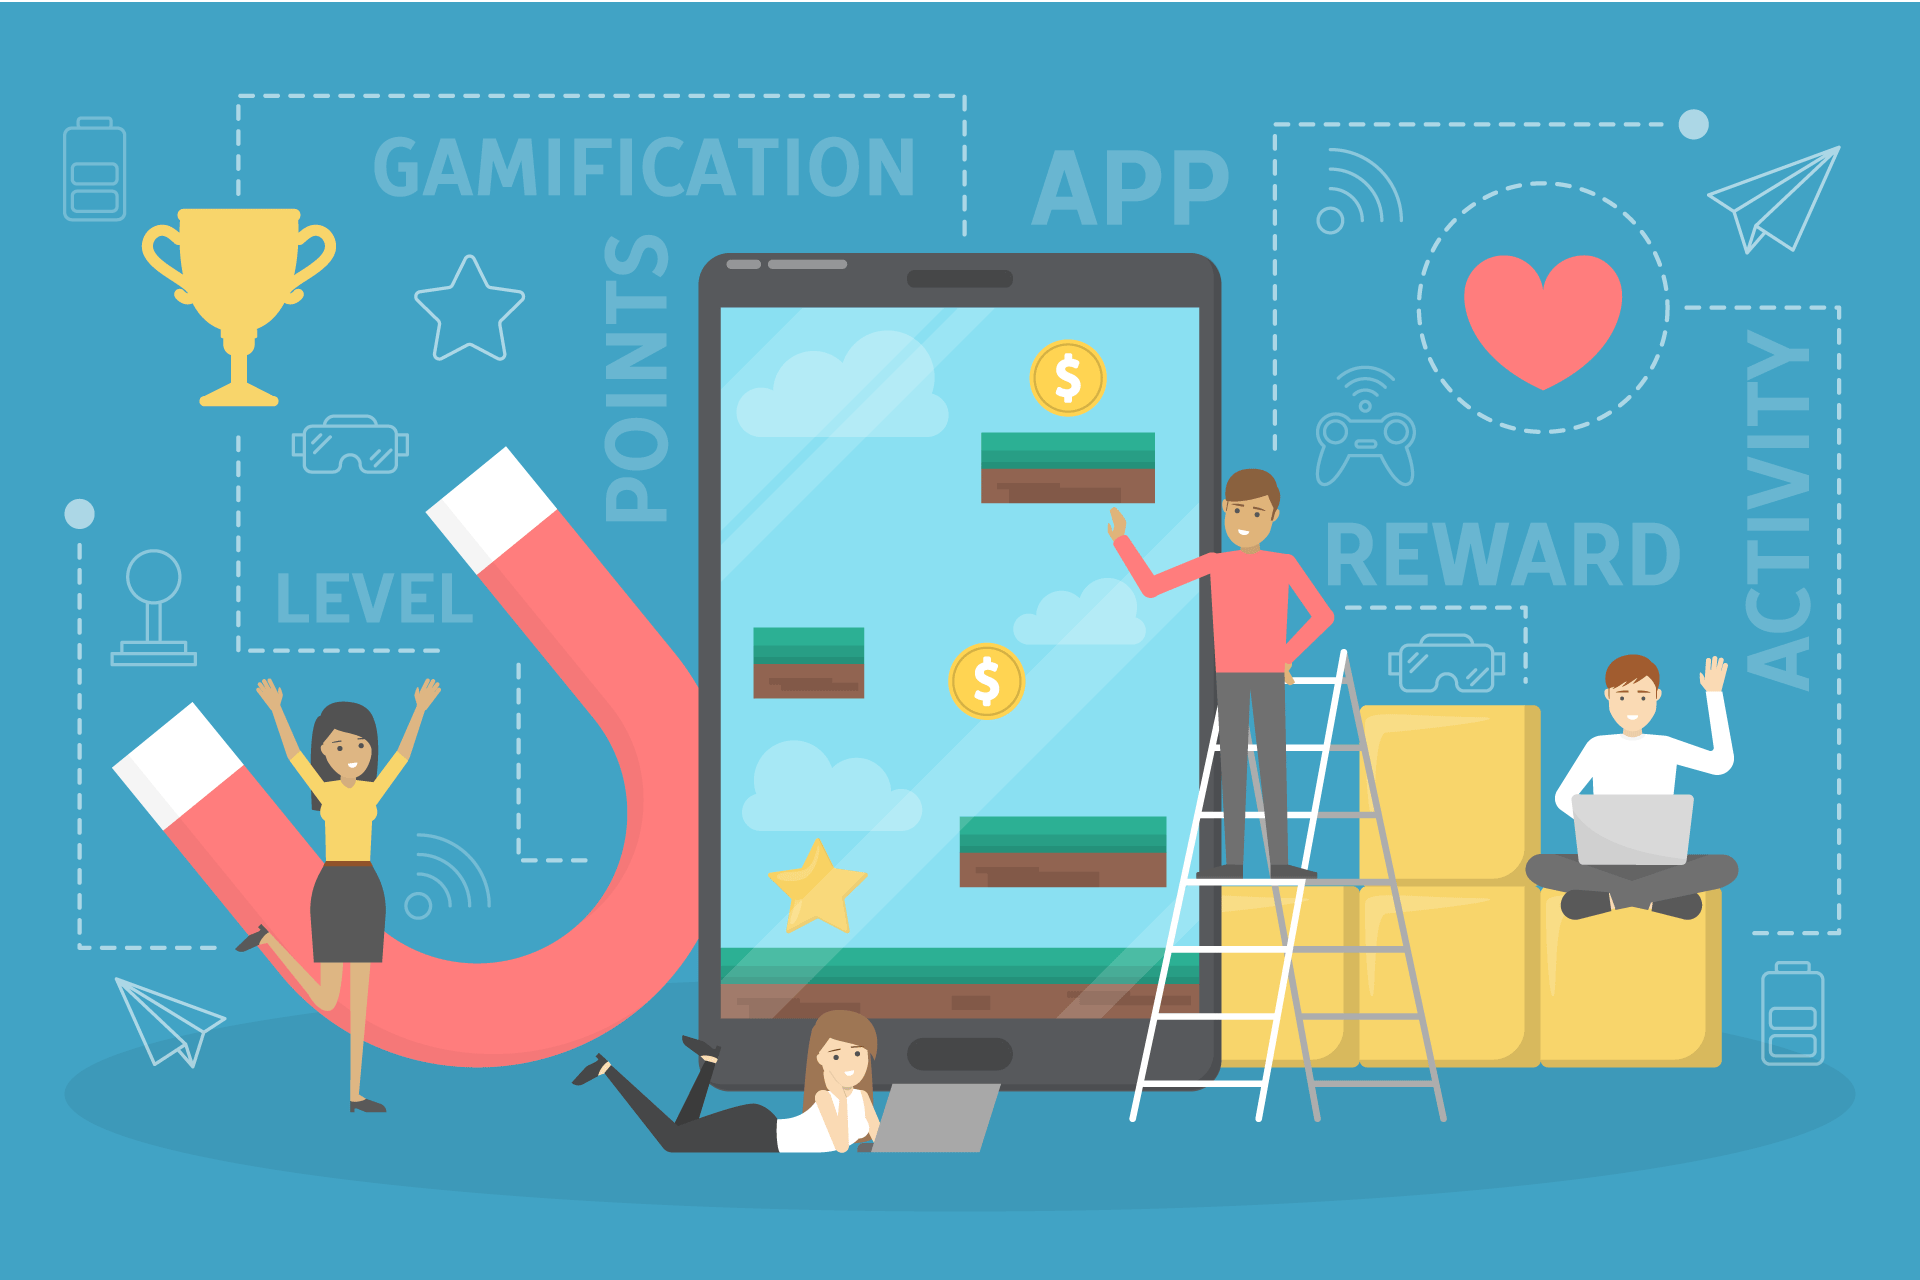 Gamification in workplace